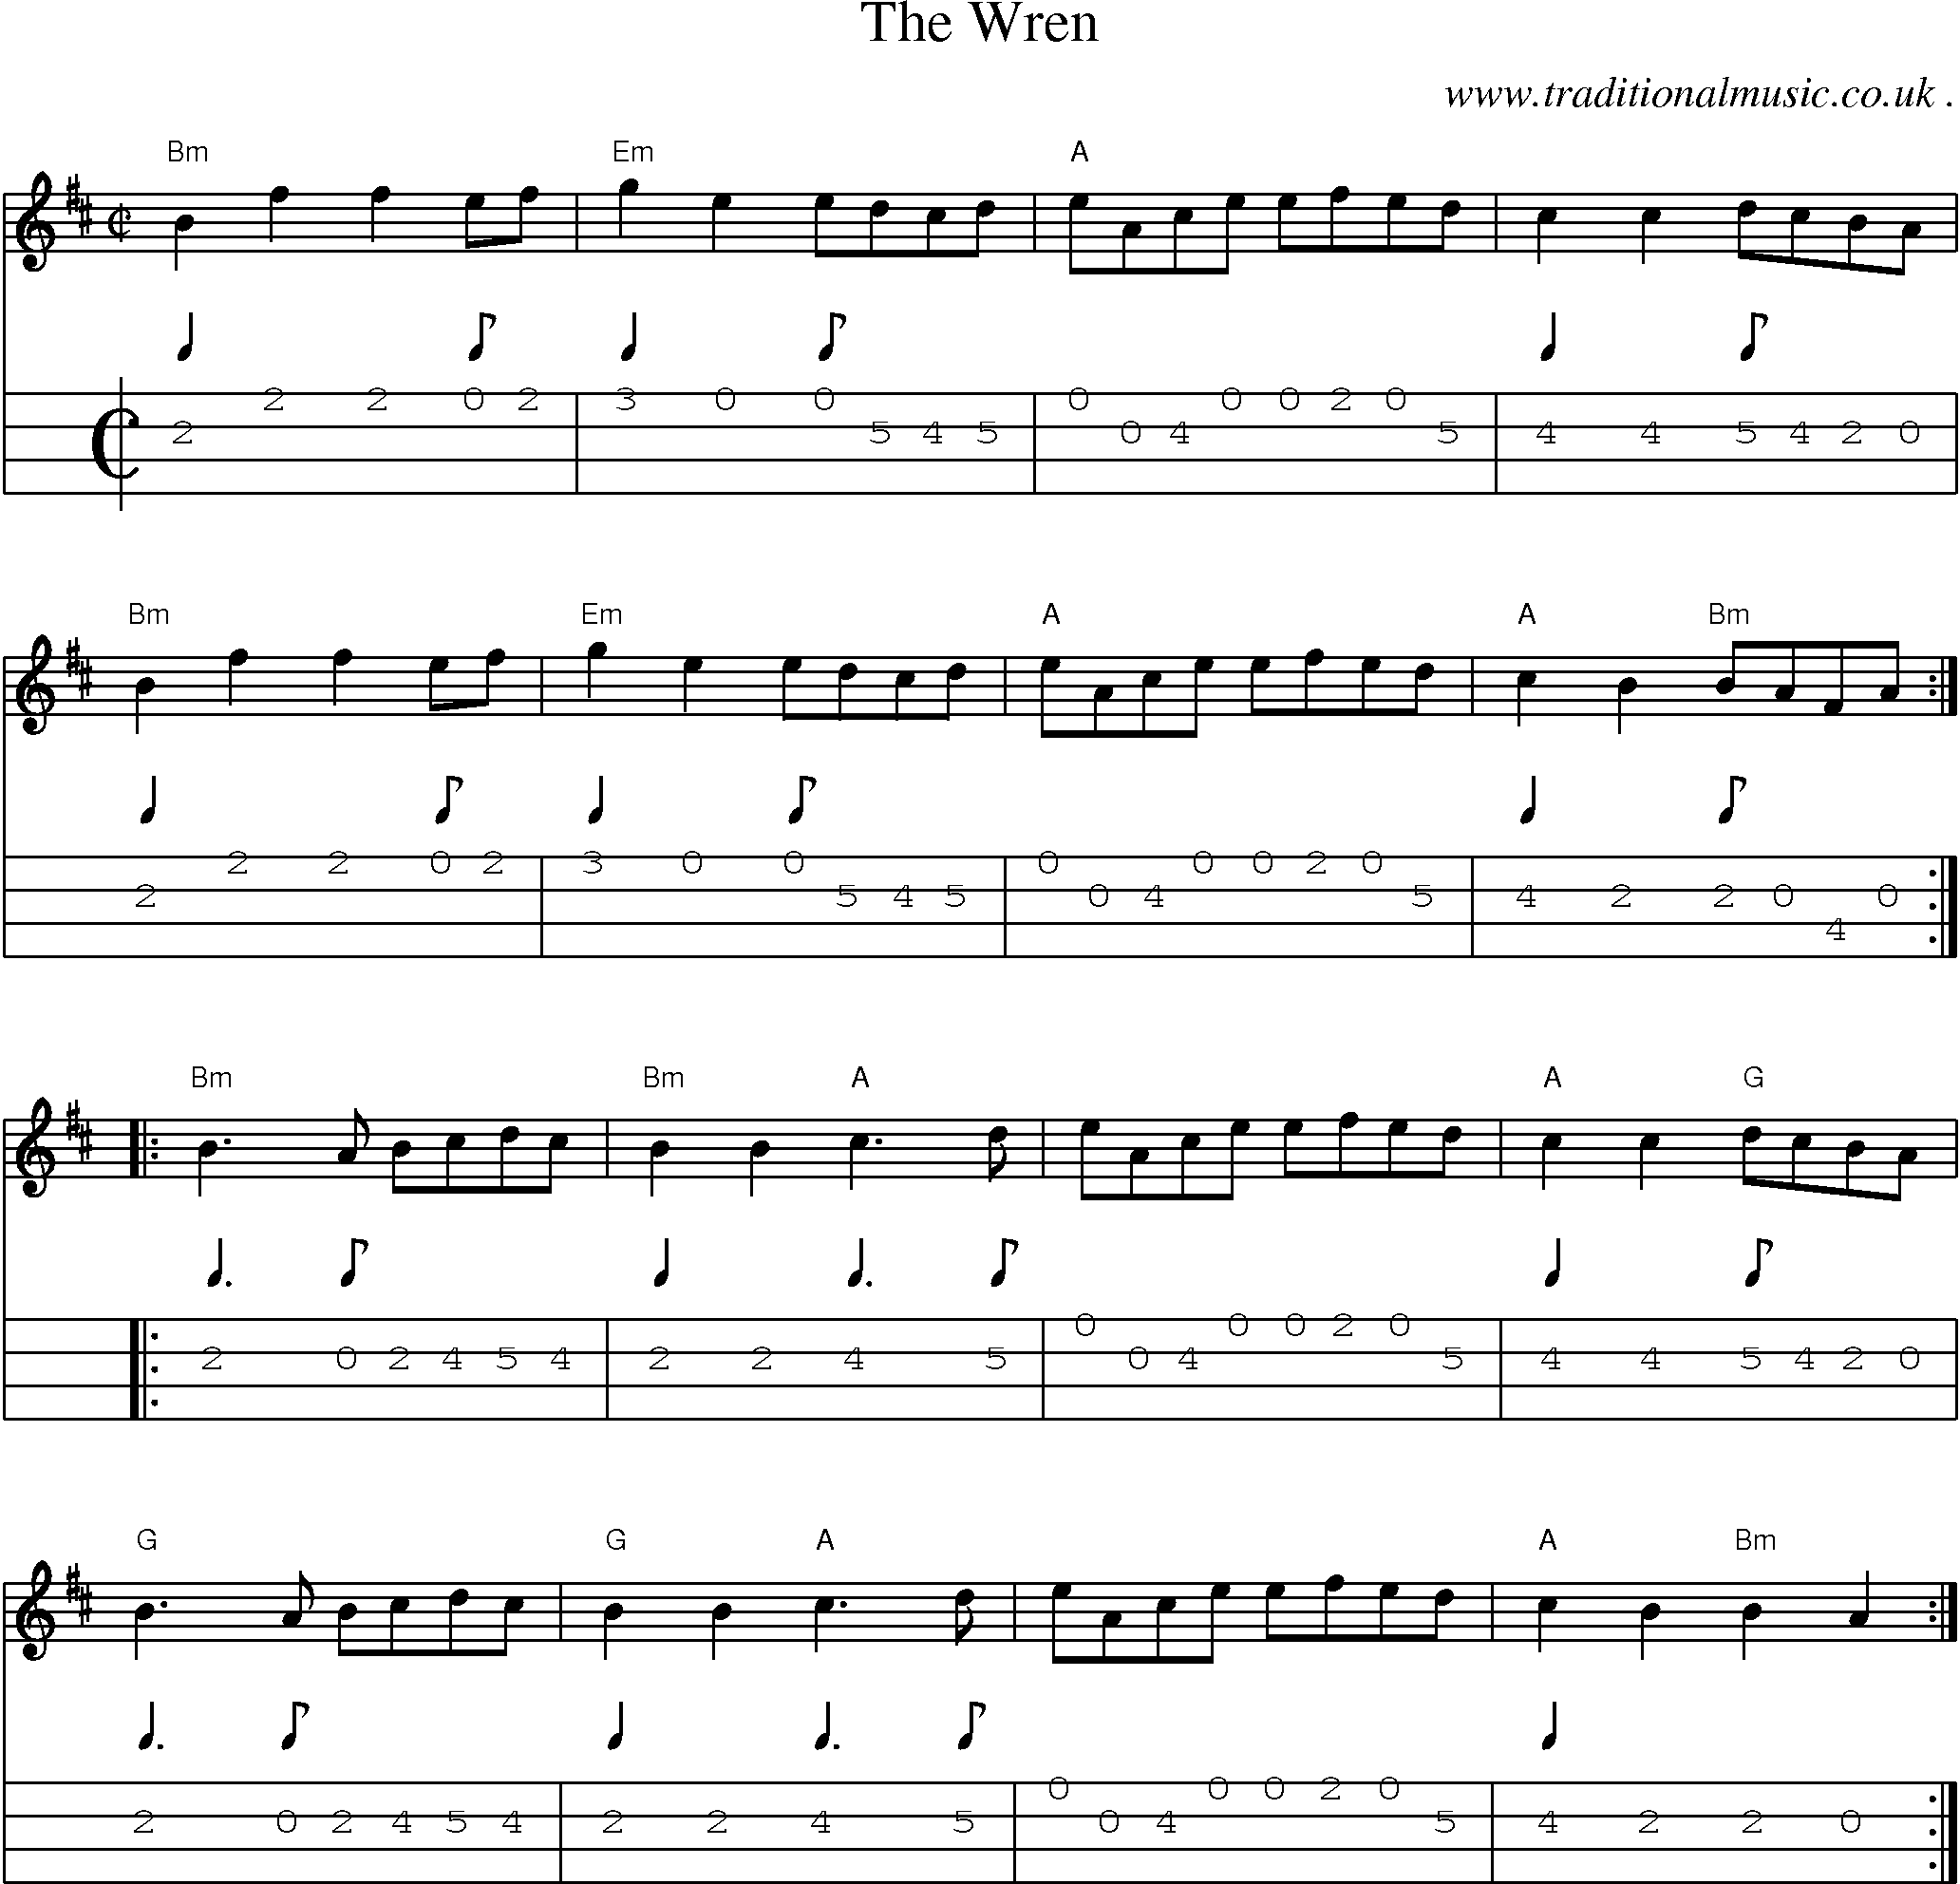 Music Score and Guitar Tabs for The Wren